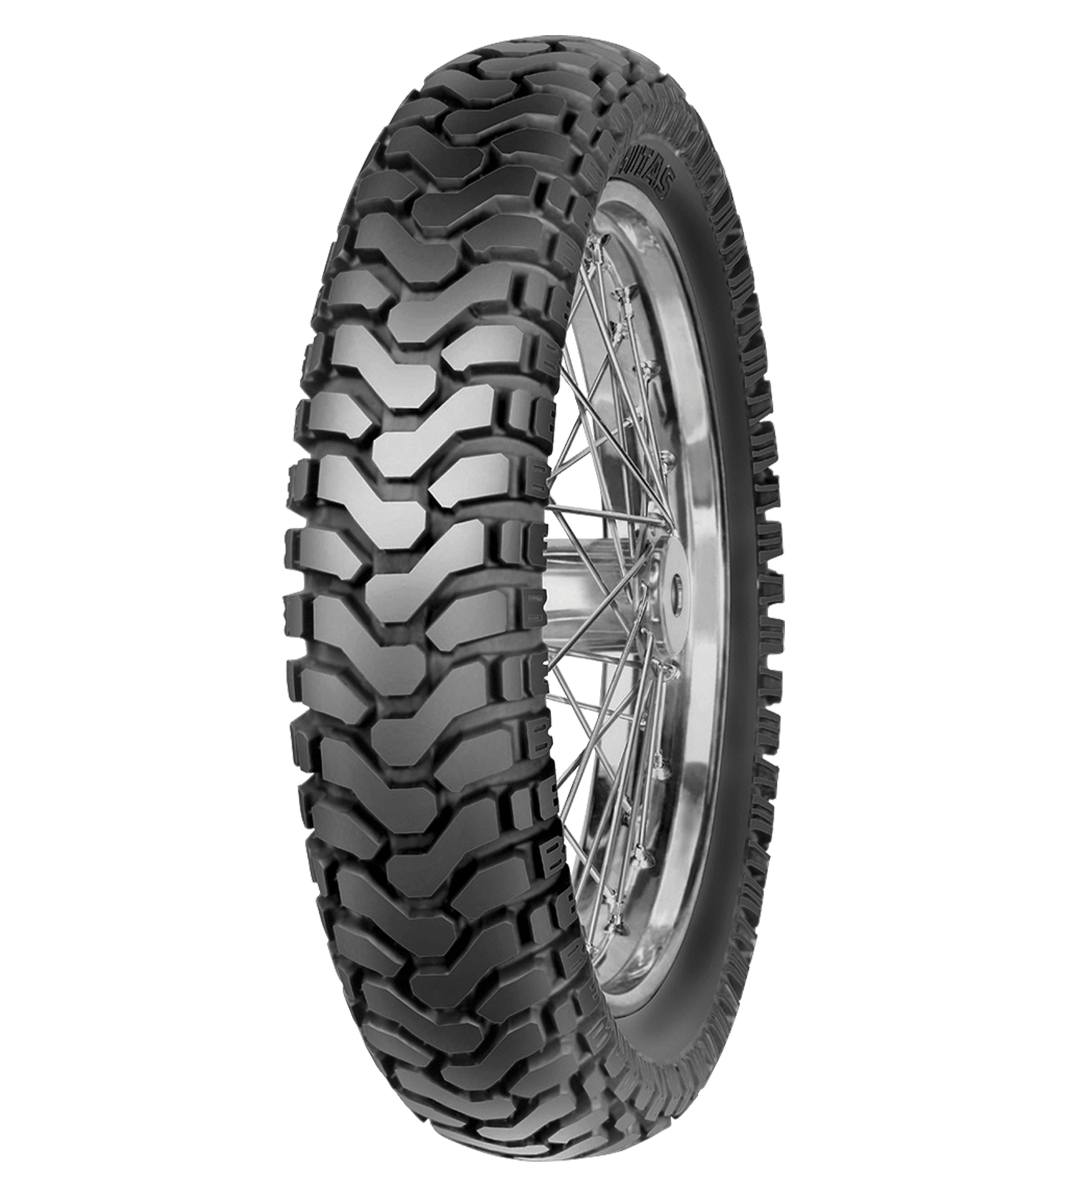 Mitas E-07 ENDURO 130/80-18 Trail OFF Trail 72T No Stripe Tubeless Rear Tire, 224415, 130/80-18, Adventure Touring, E Series, E-07 Enduro, Rear, Trail, Trail OFF, Tires - Imported and distributed in North & South America by Lindeco Genuine Powersports - Premier Powersports Equipment and Accessories for Motorcycle Enthusiasts, Professional Riders and Dealers.